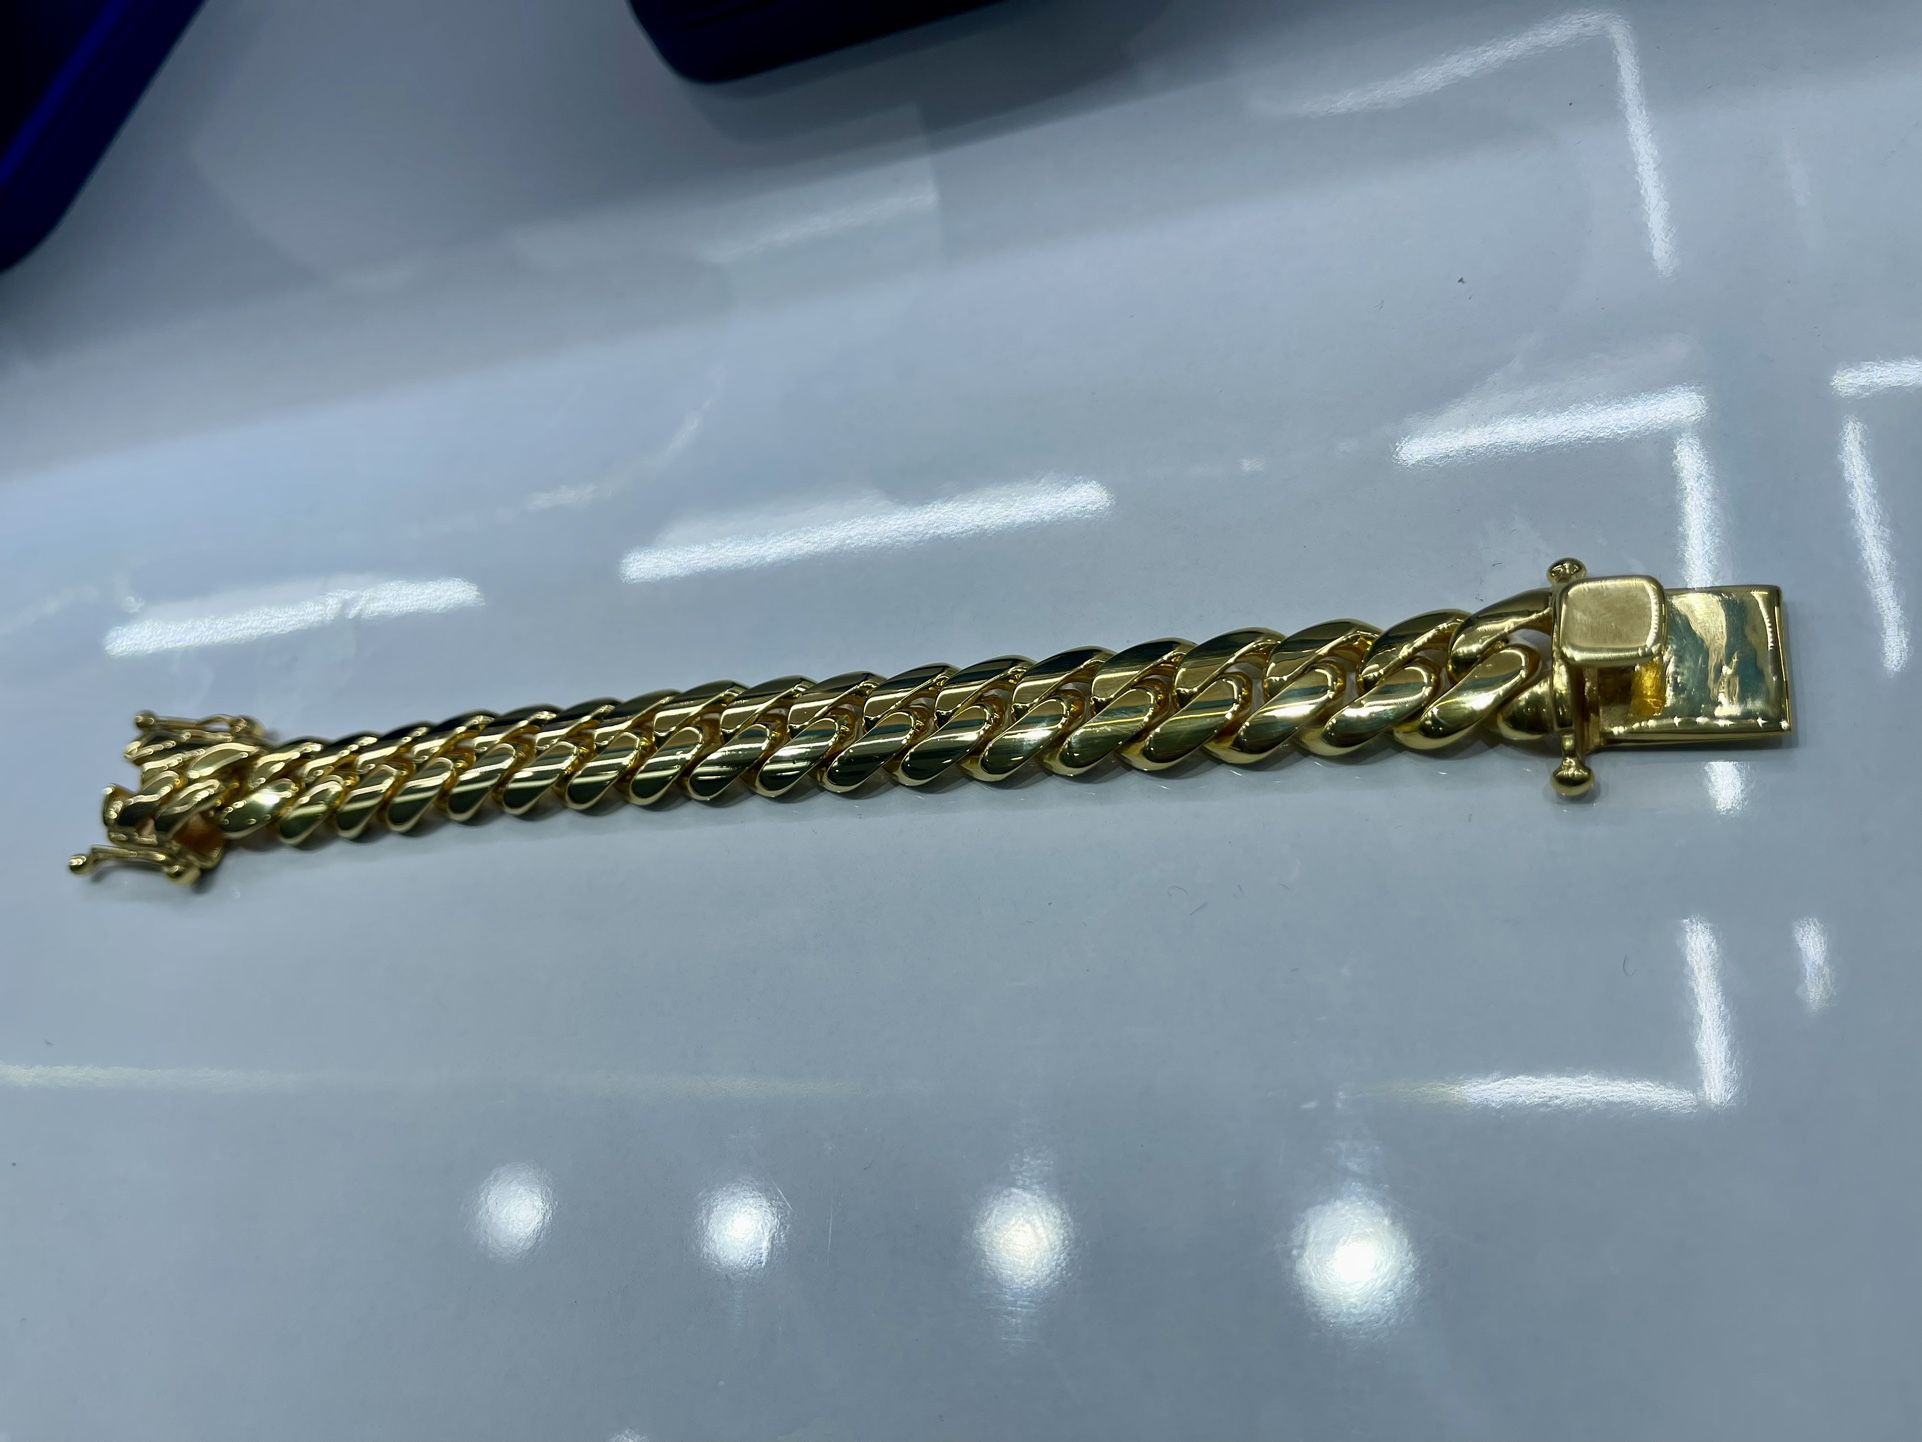 🌴🌍14mm 7” Perfecto 👌🤩 File Miami Cuban Link Bracelet Plated 4-6 Hrs Water Gold Bath 🛁you Can’t Tell If It’s Fake 🤝😀 